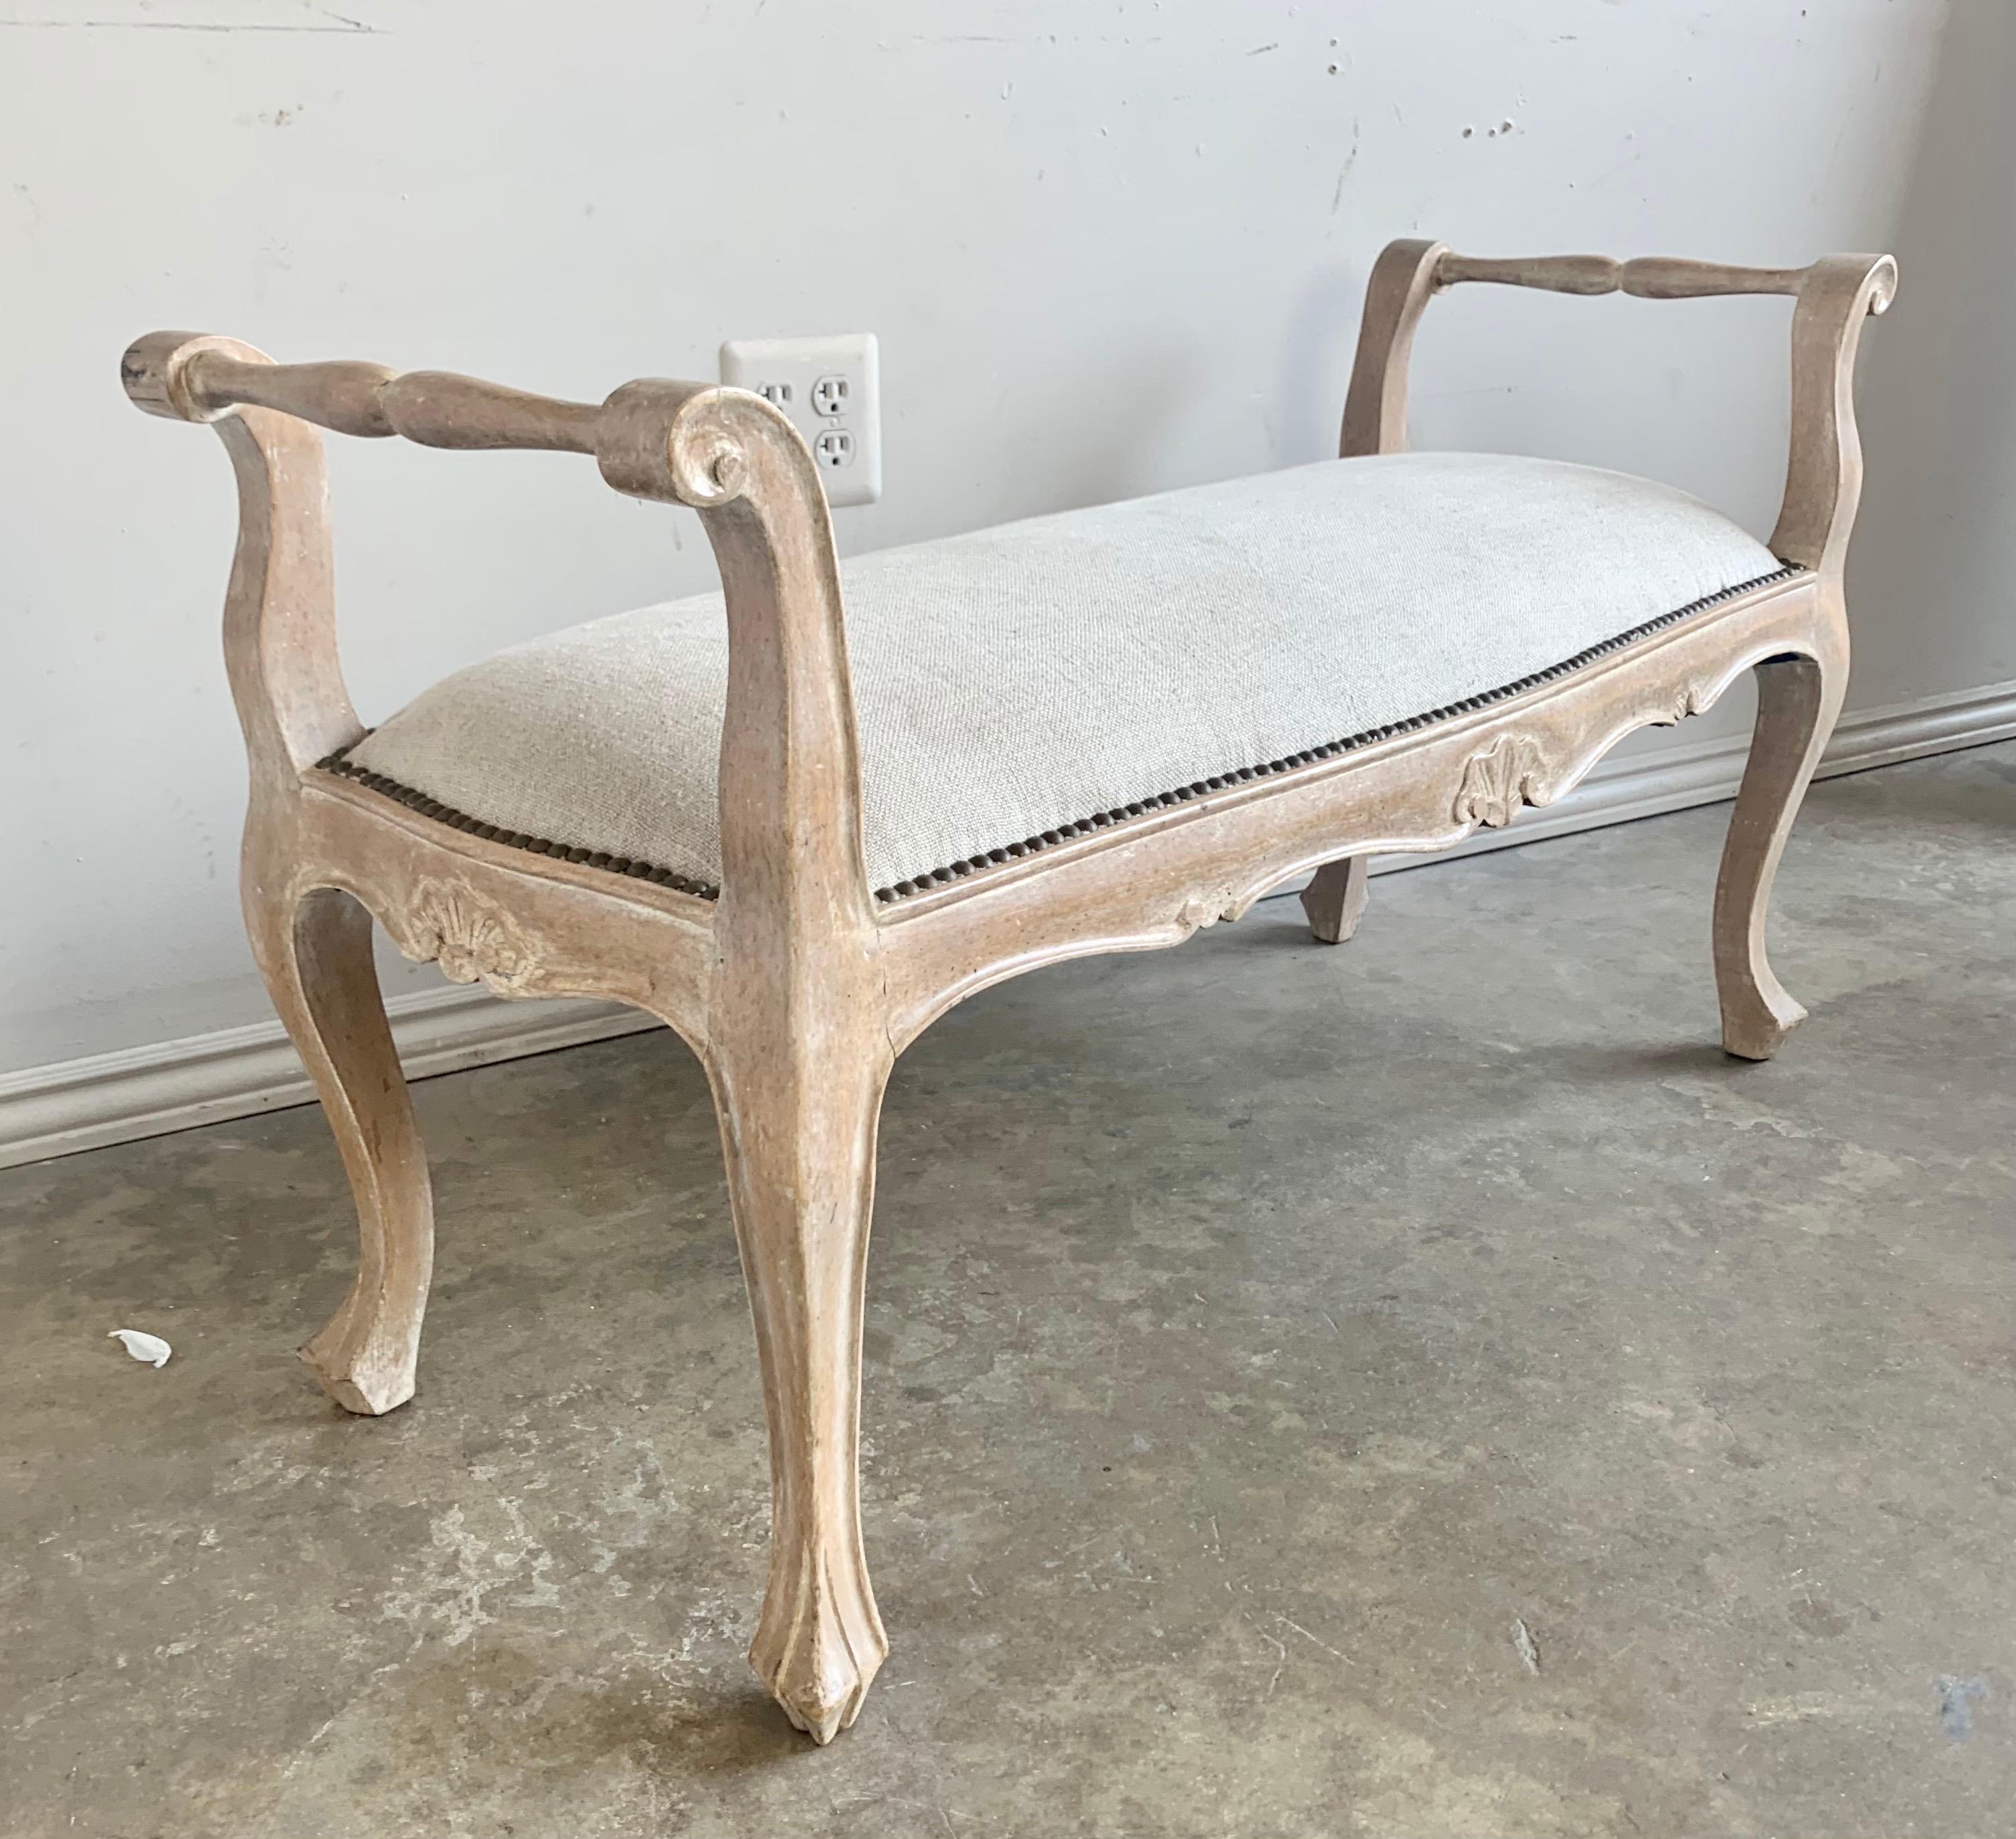 French Louis XV style bleached walnut bench that is newly upholstered in an oatmeal colored Belgium linen. The bench stands on four cabriole legs. Beautiful natural wood finish.